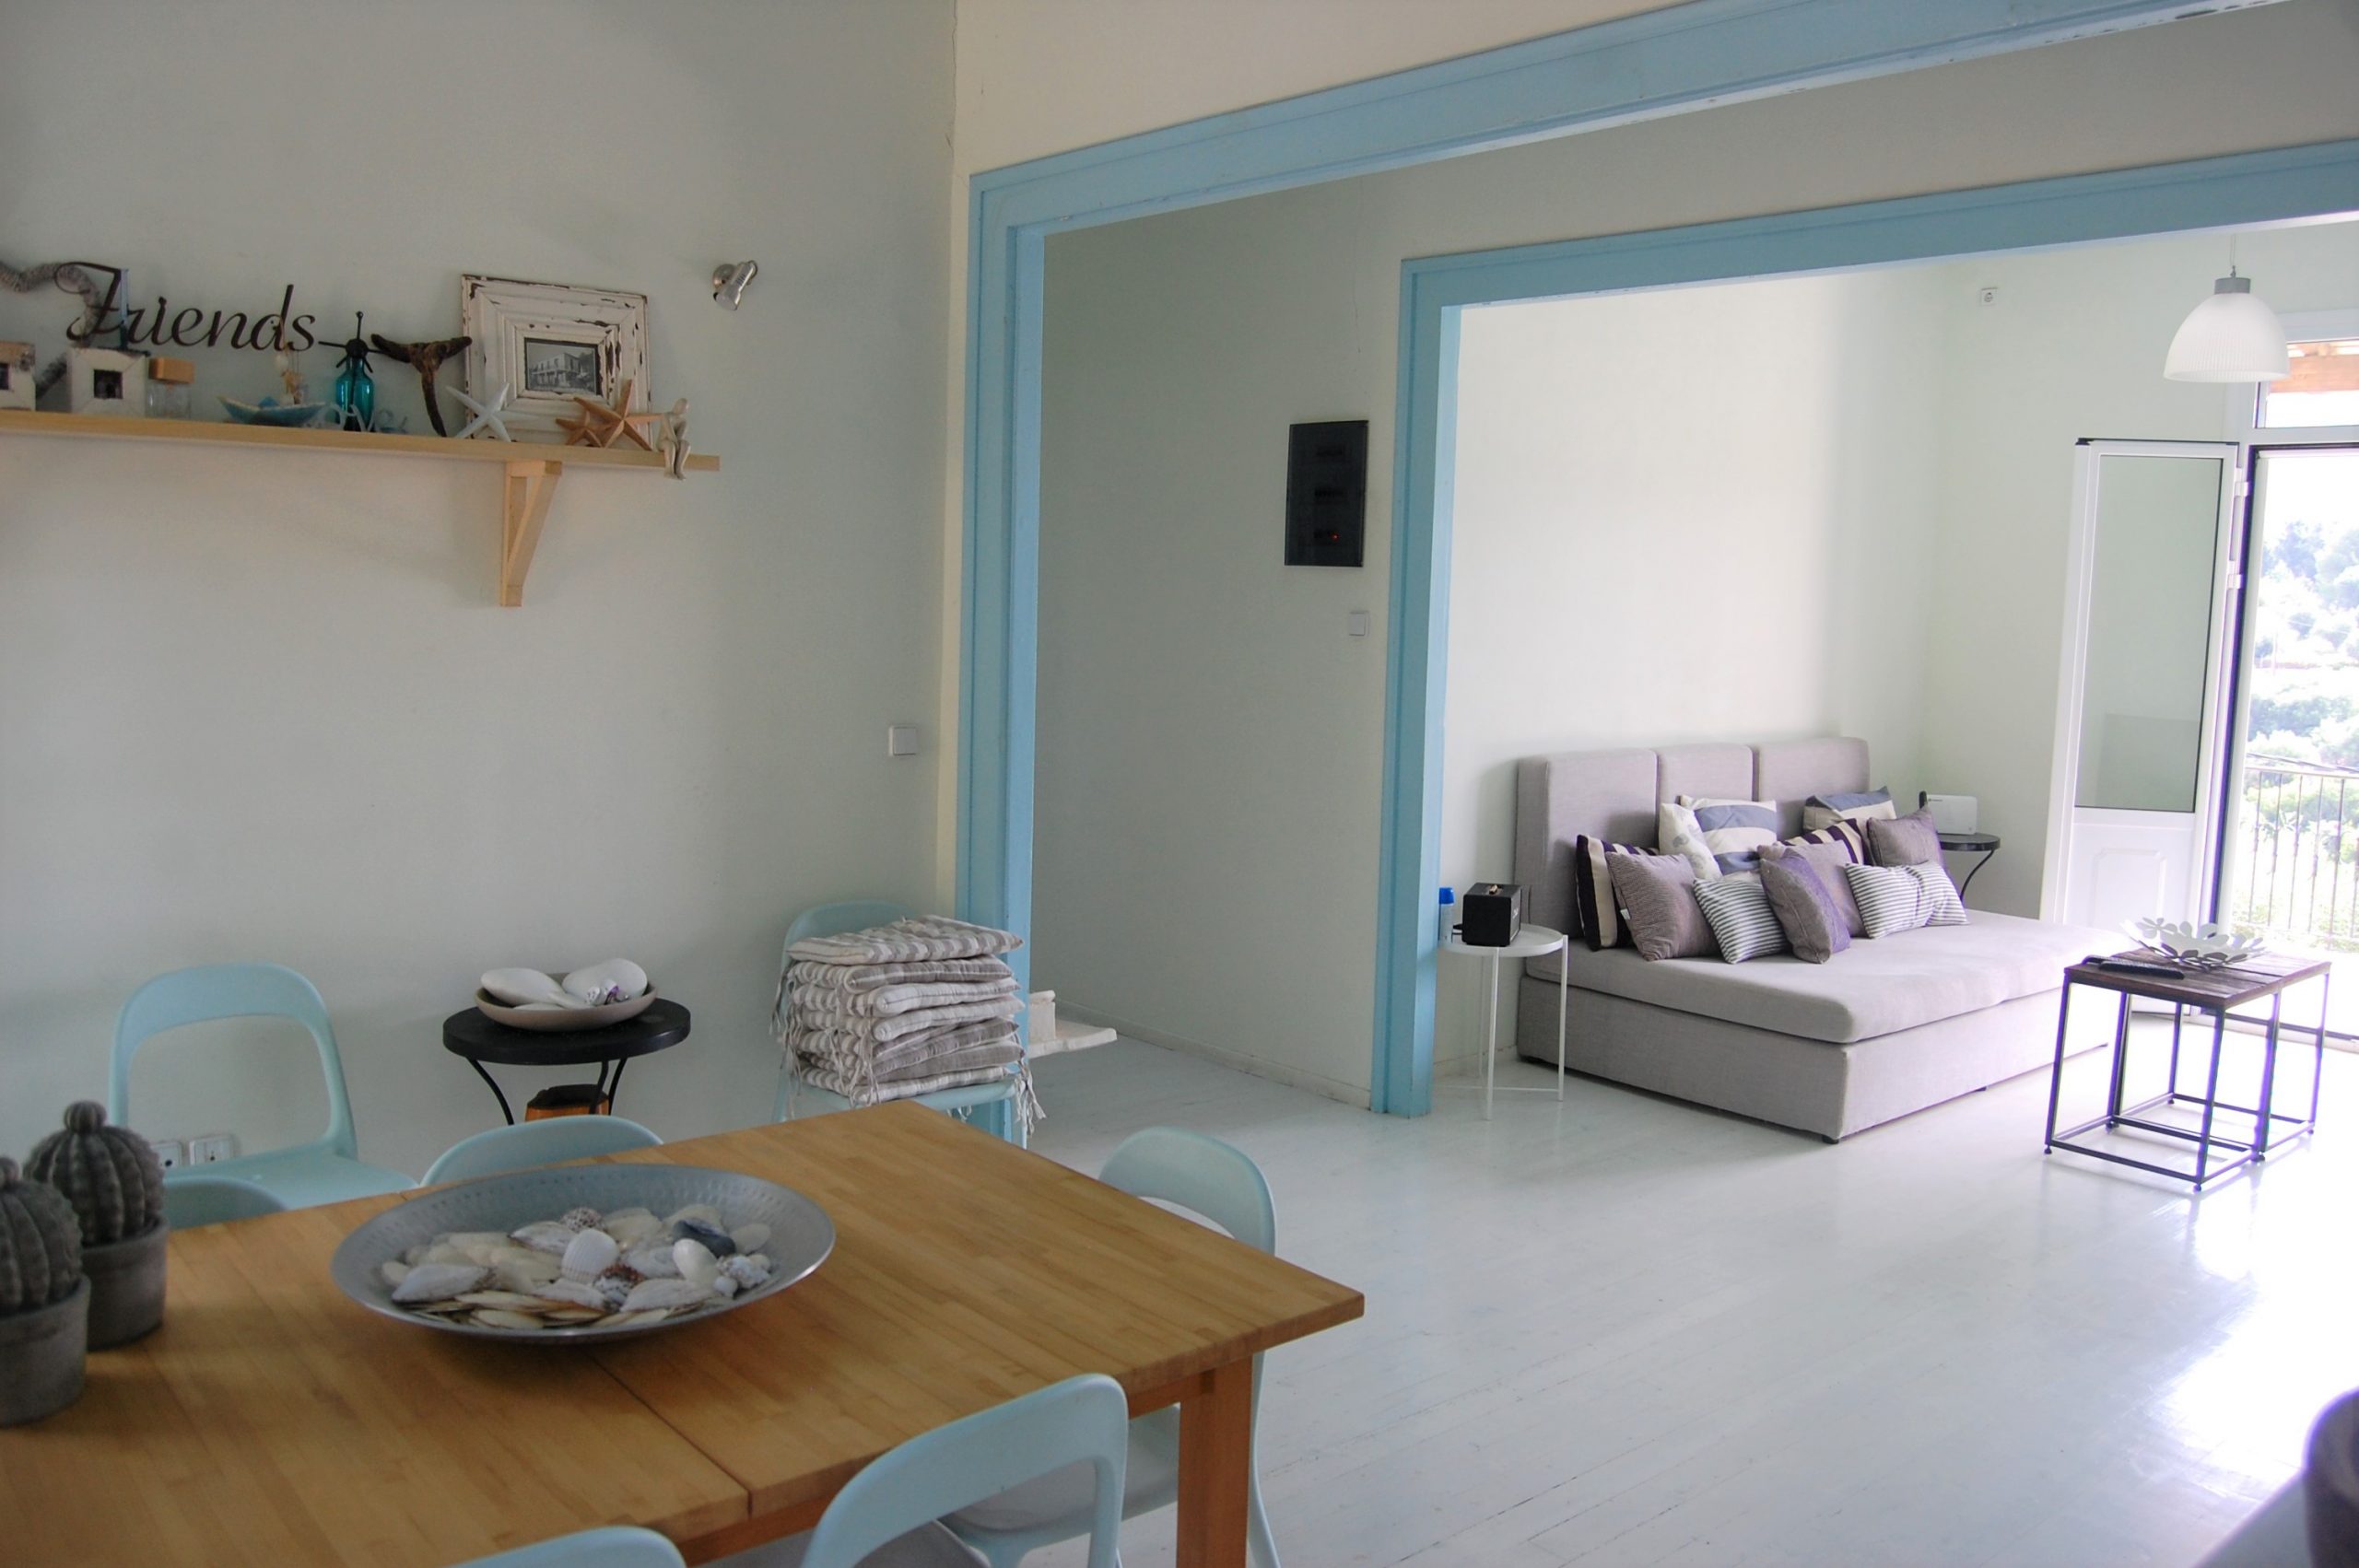 Living room area of holiday house for rent on Ithaca Greece, Kolleri